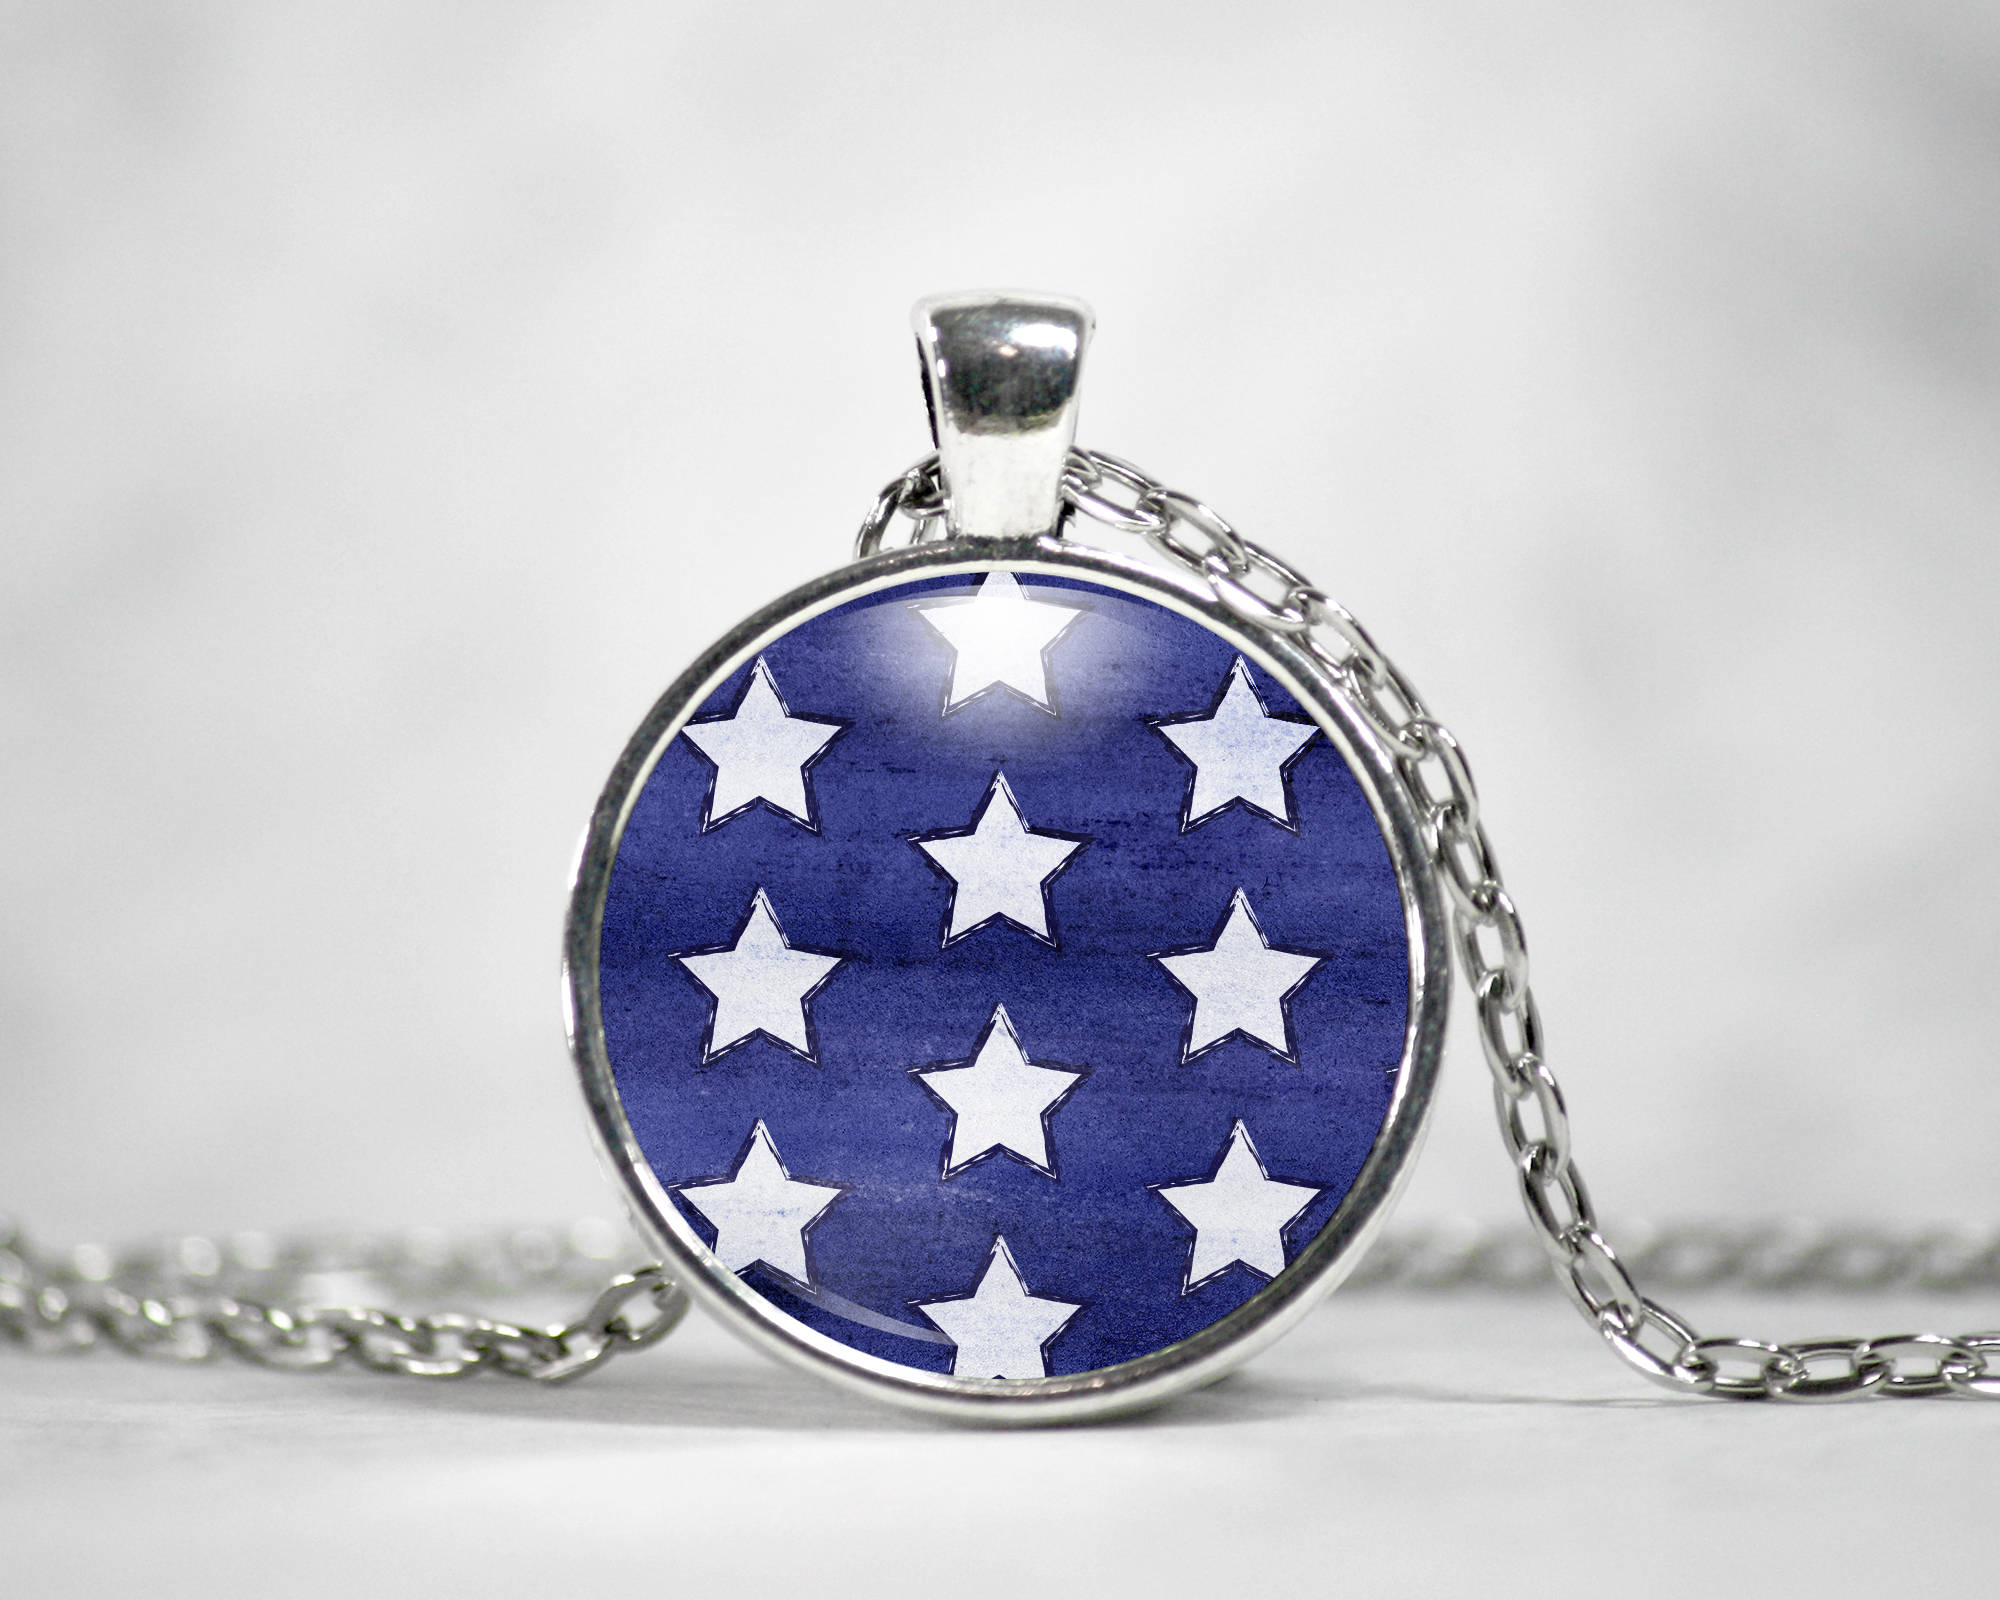 Cabochon Collage Sheet - Blue Stars and Stripes - Printable round image in 5 sizes